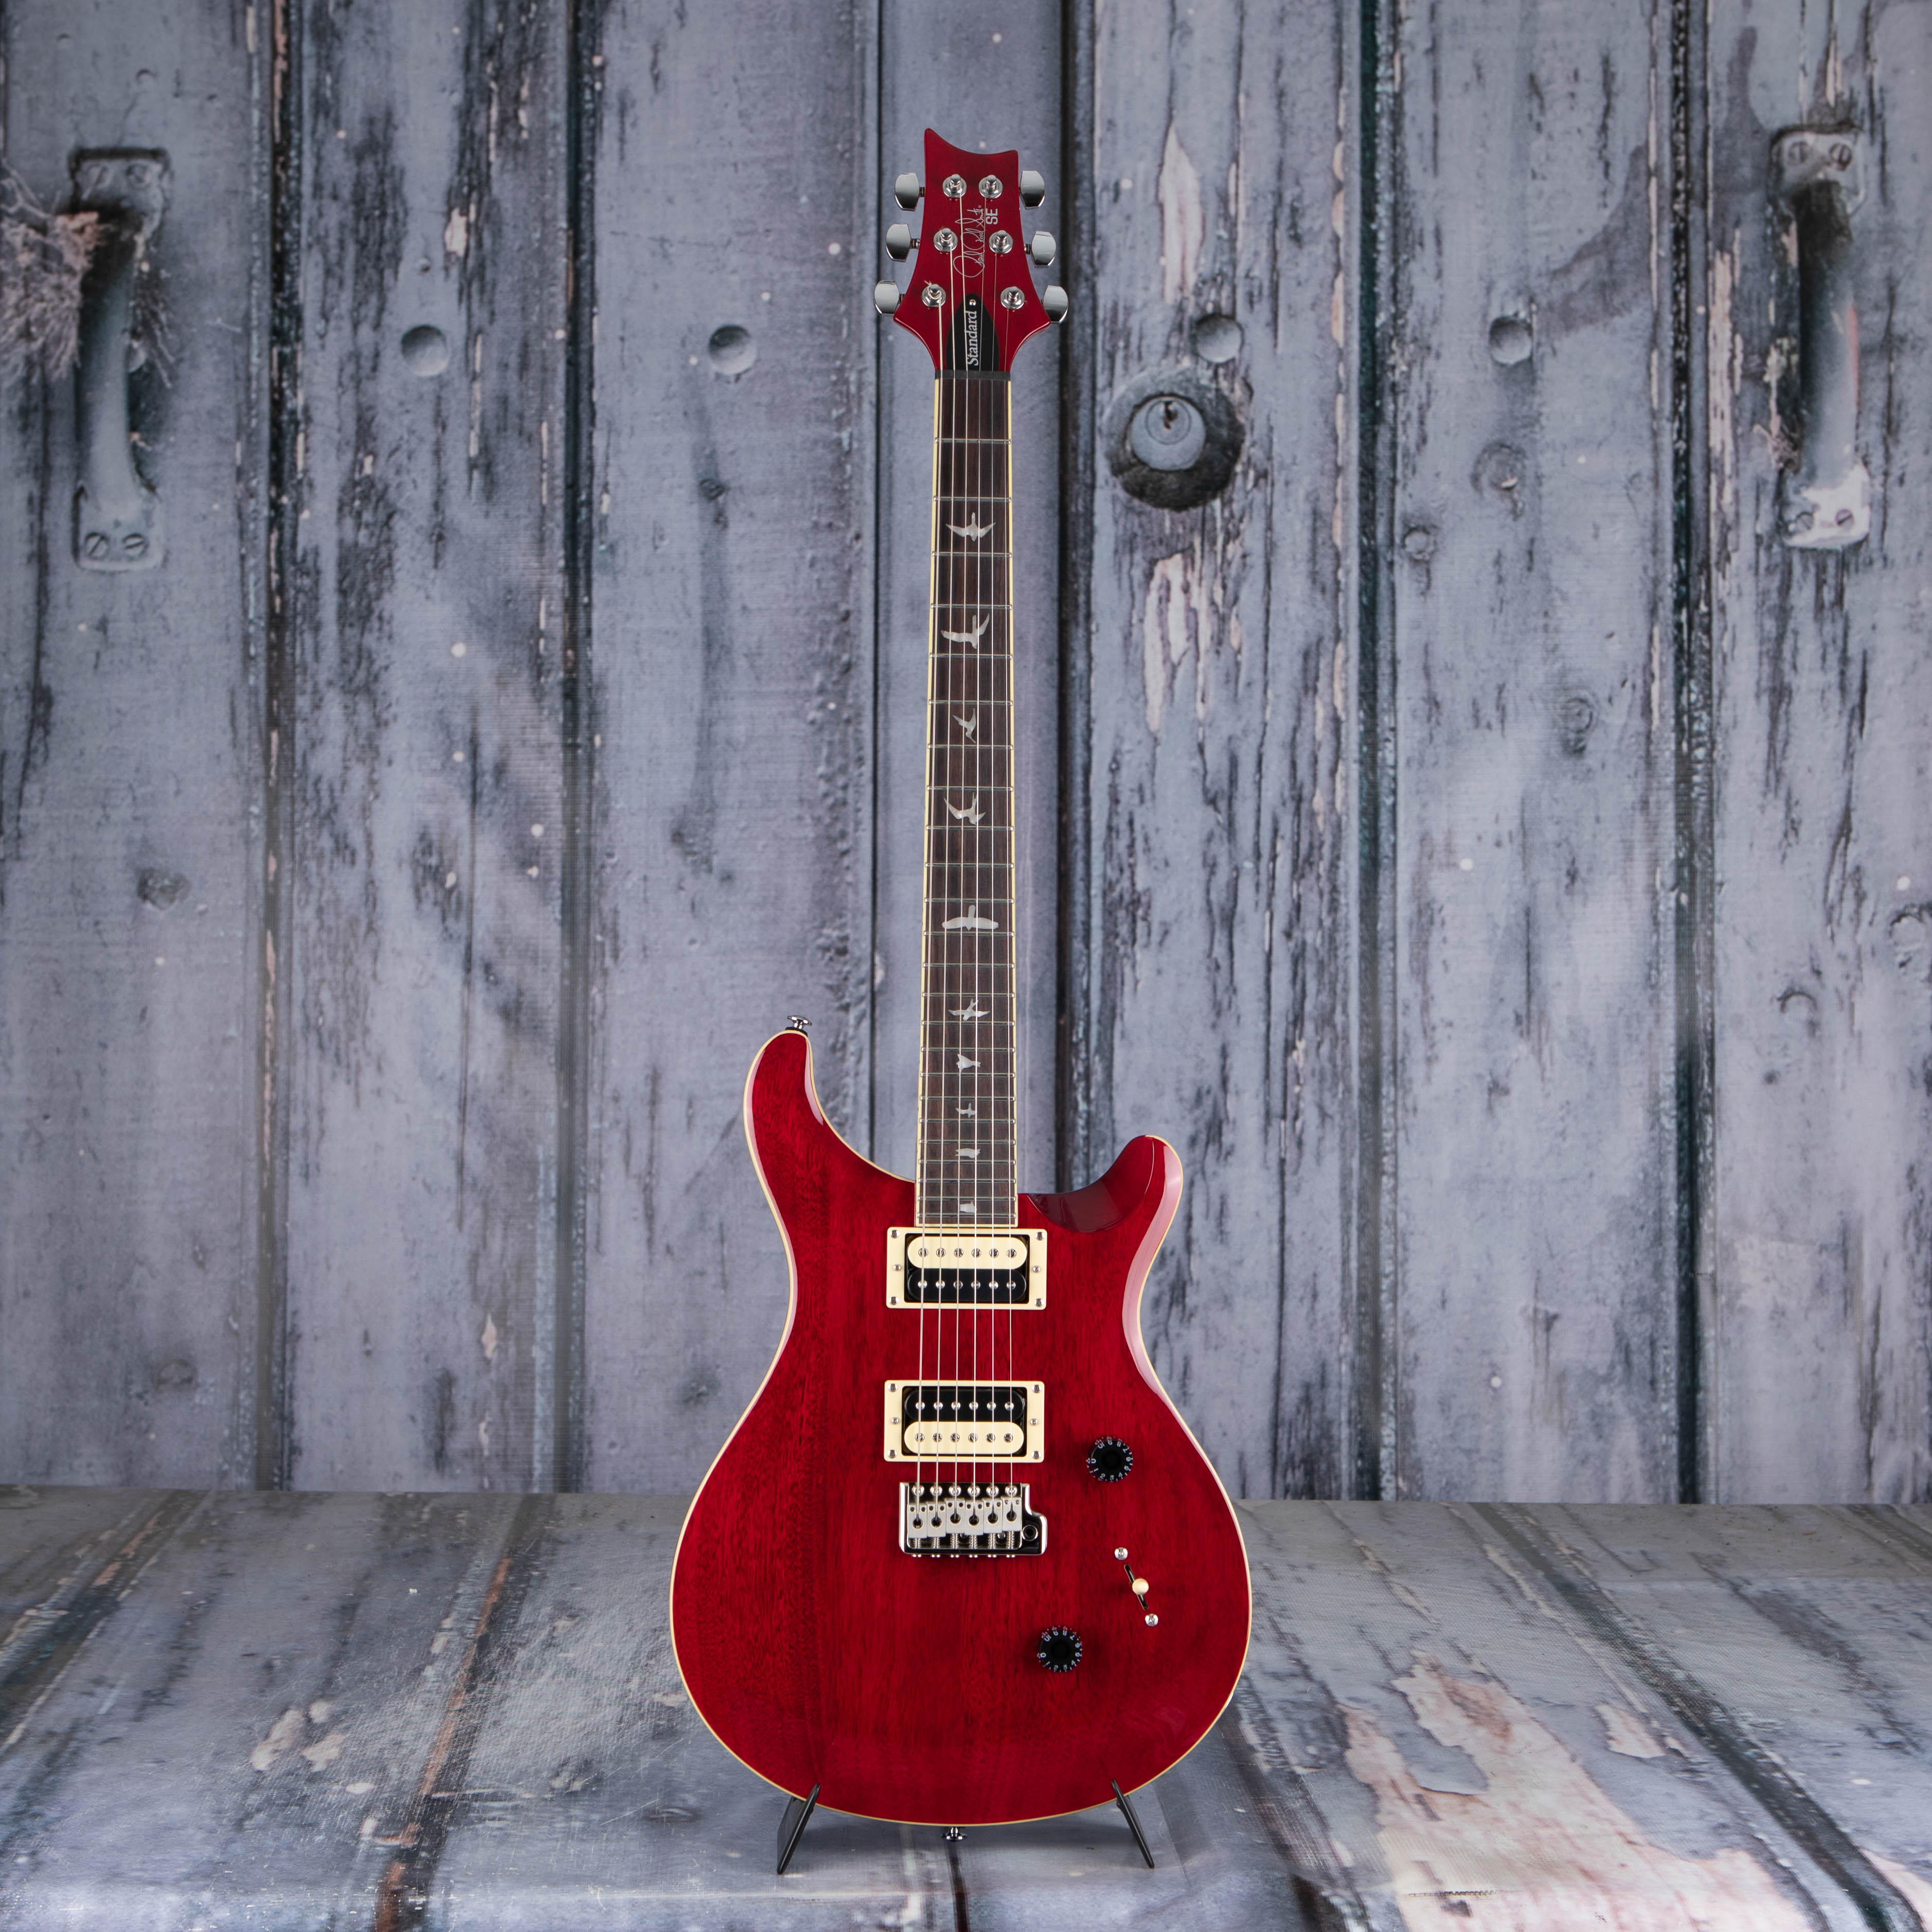 Paul Reed Smith SE Standard 24 Electric Guitar, Vintage Cherry, front